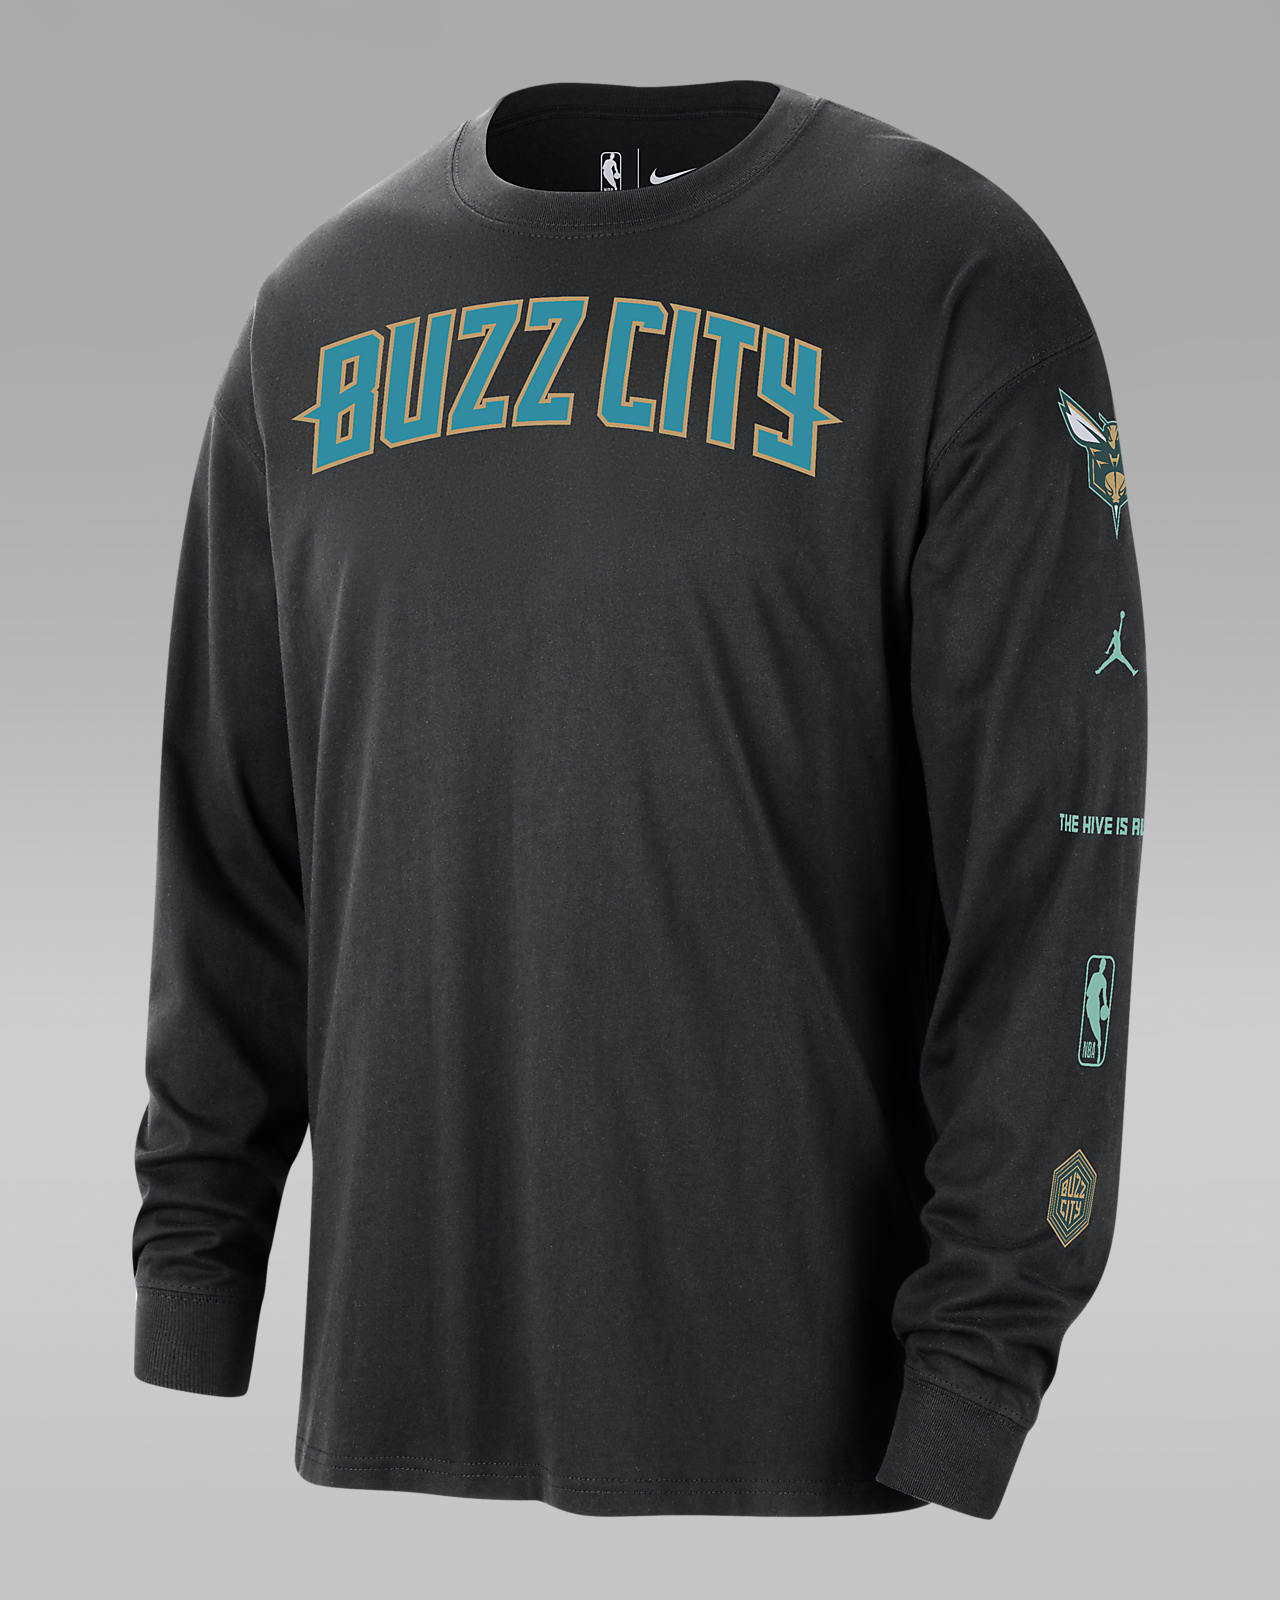 Order your Charlotte Hornets Nike City Edition gear today